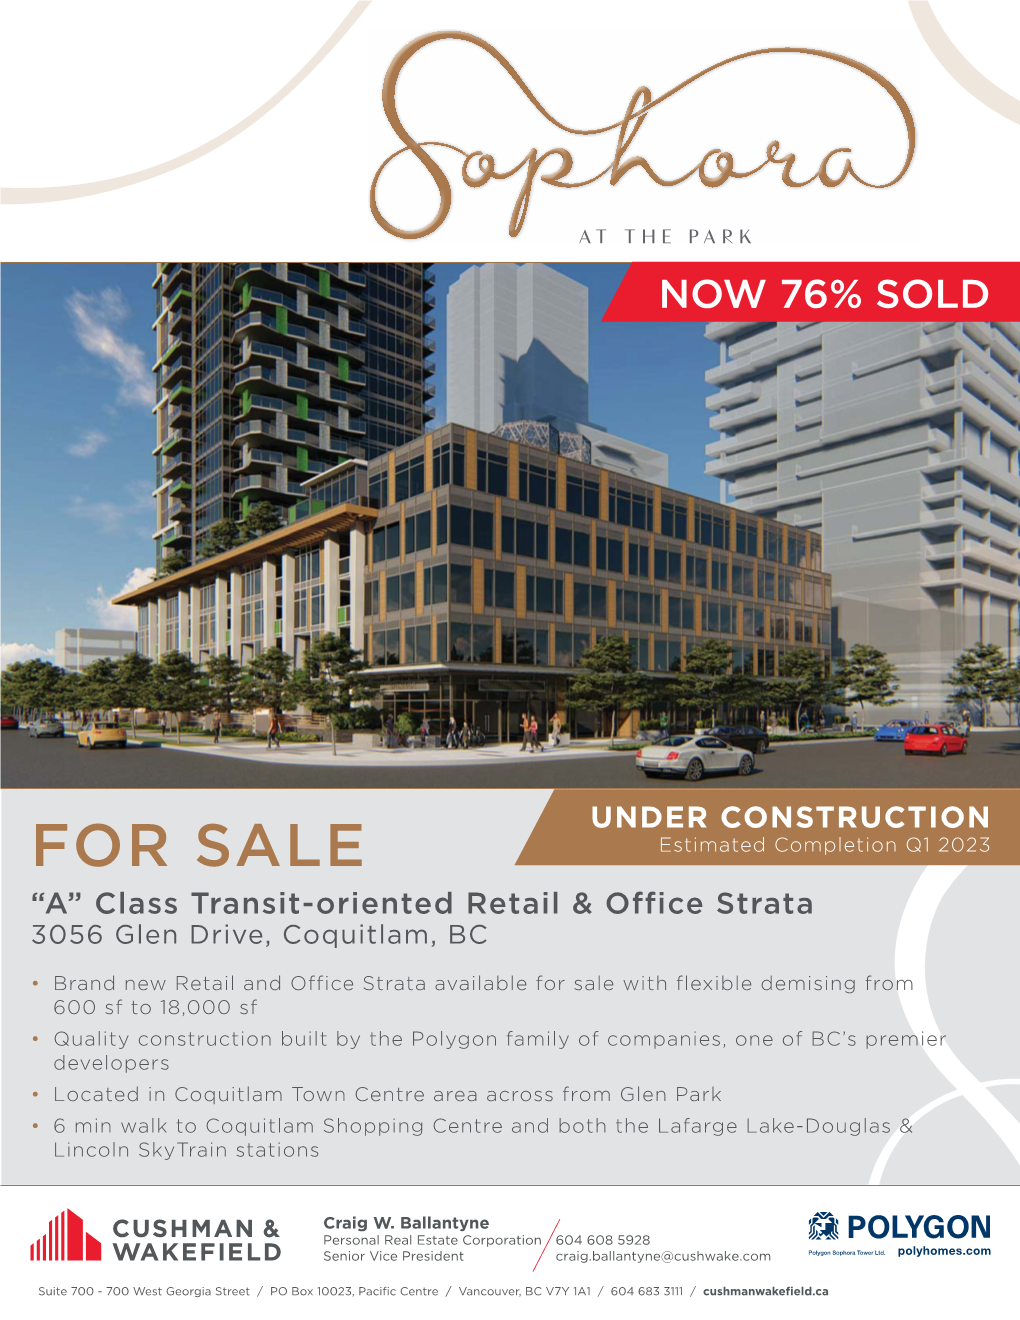 FOR SALE Estimated Completion Q1 2023 “A” Class Transit-Oriented Retail & Office Strata 3056 Glen Drive, Coquitlam, BC